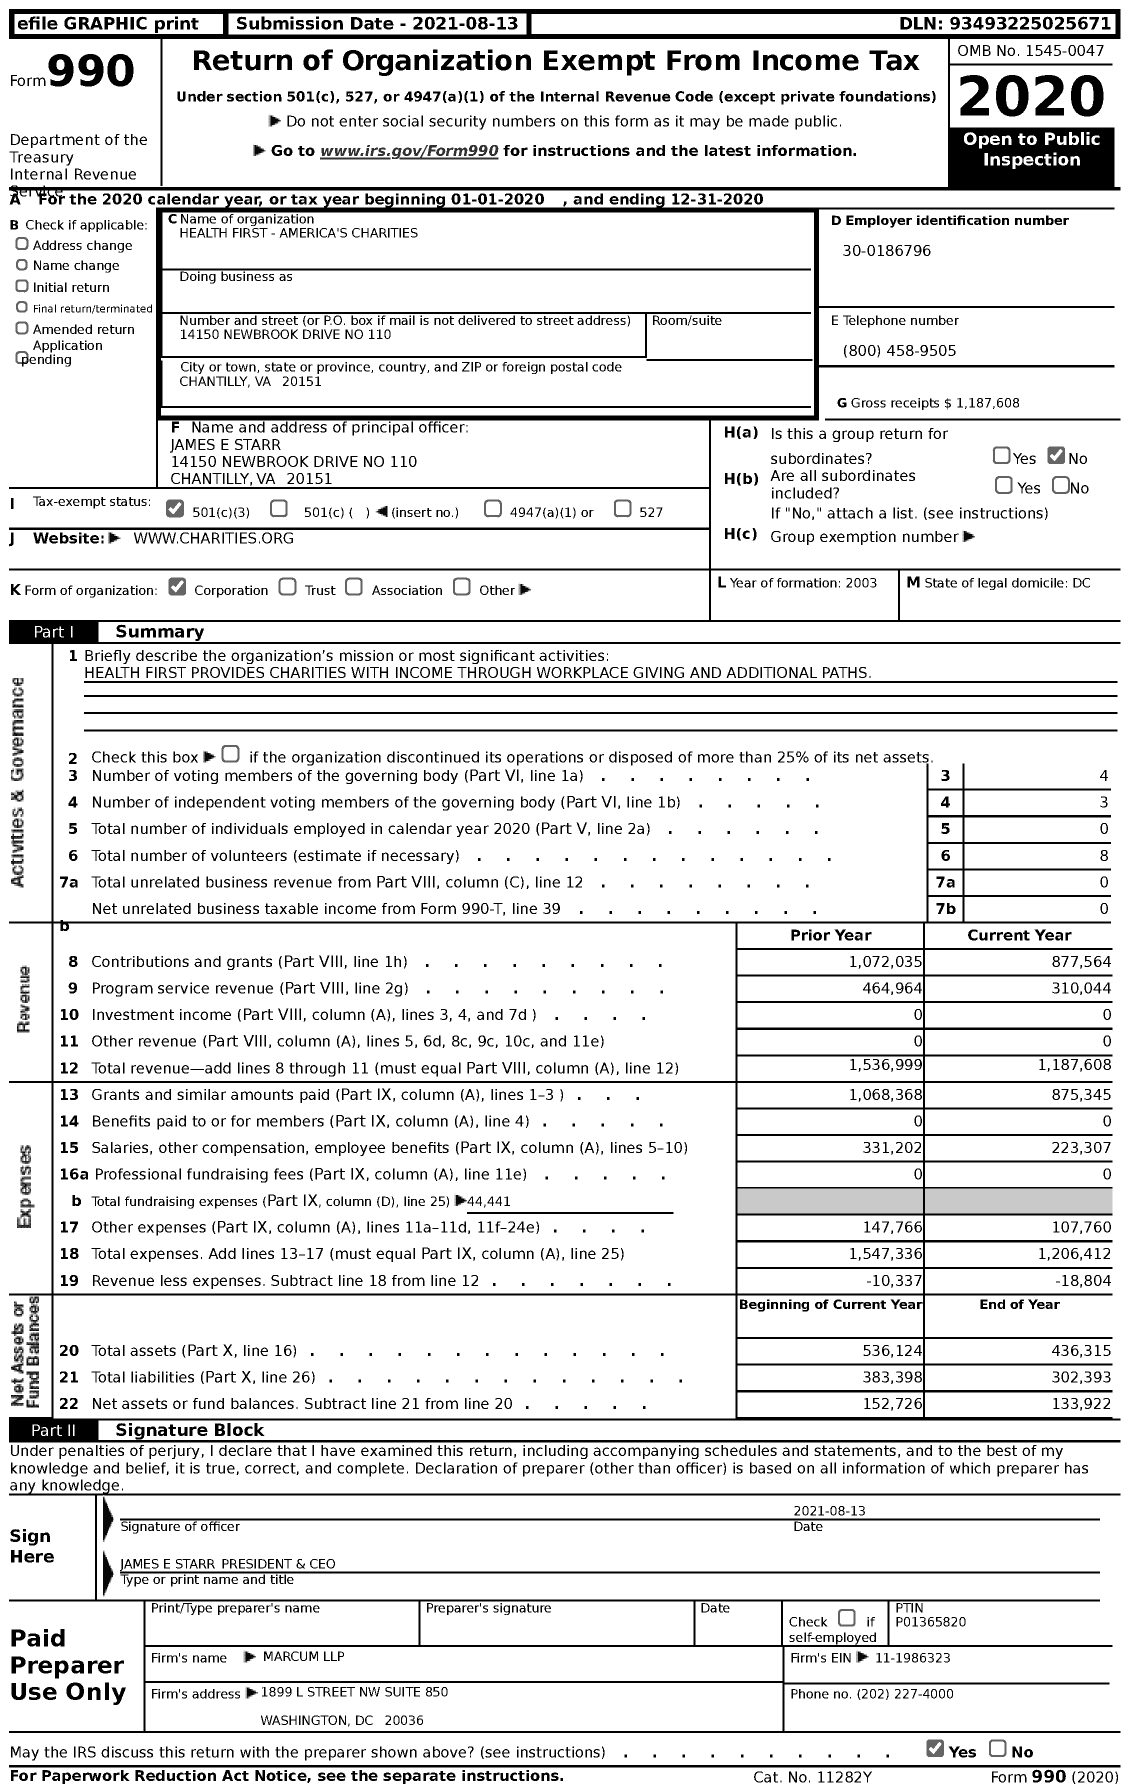 Image of first page of 2020 Form 990 for Health First - America's Charities